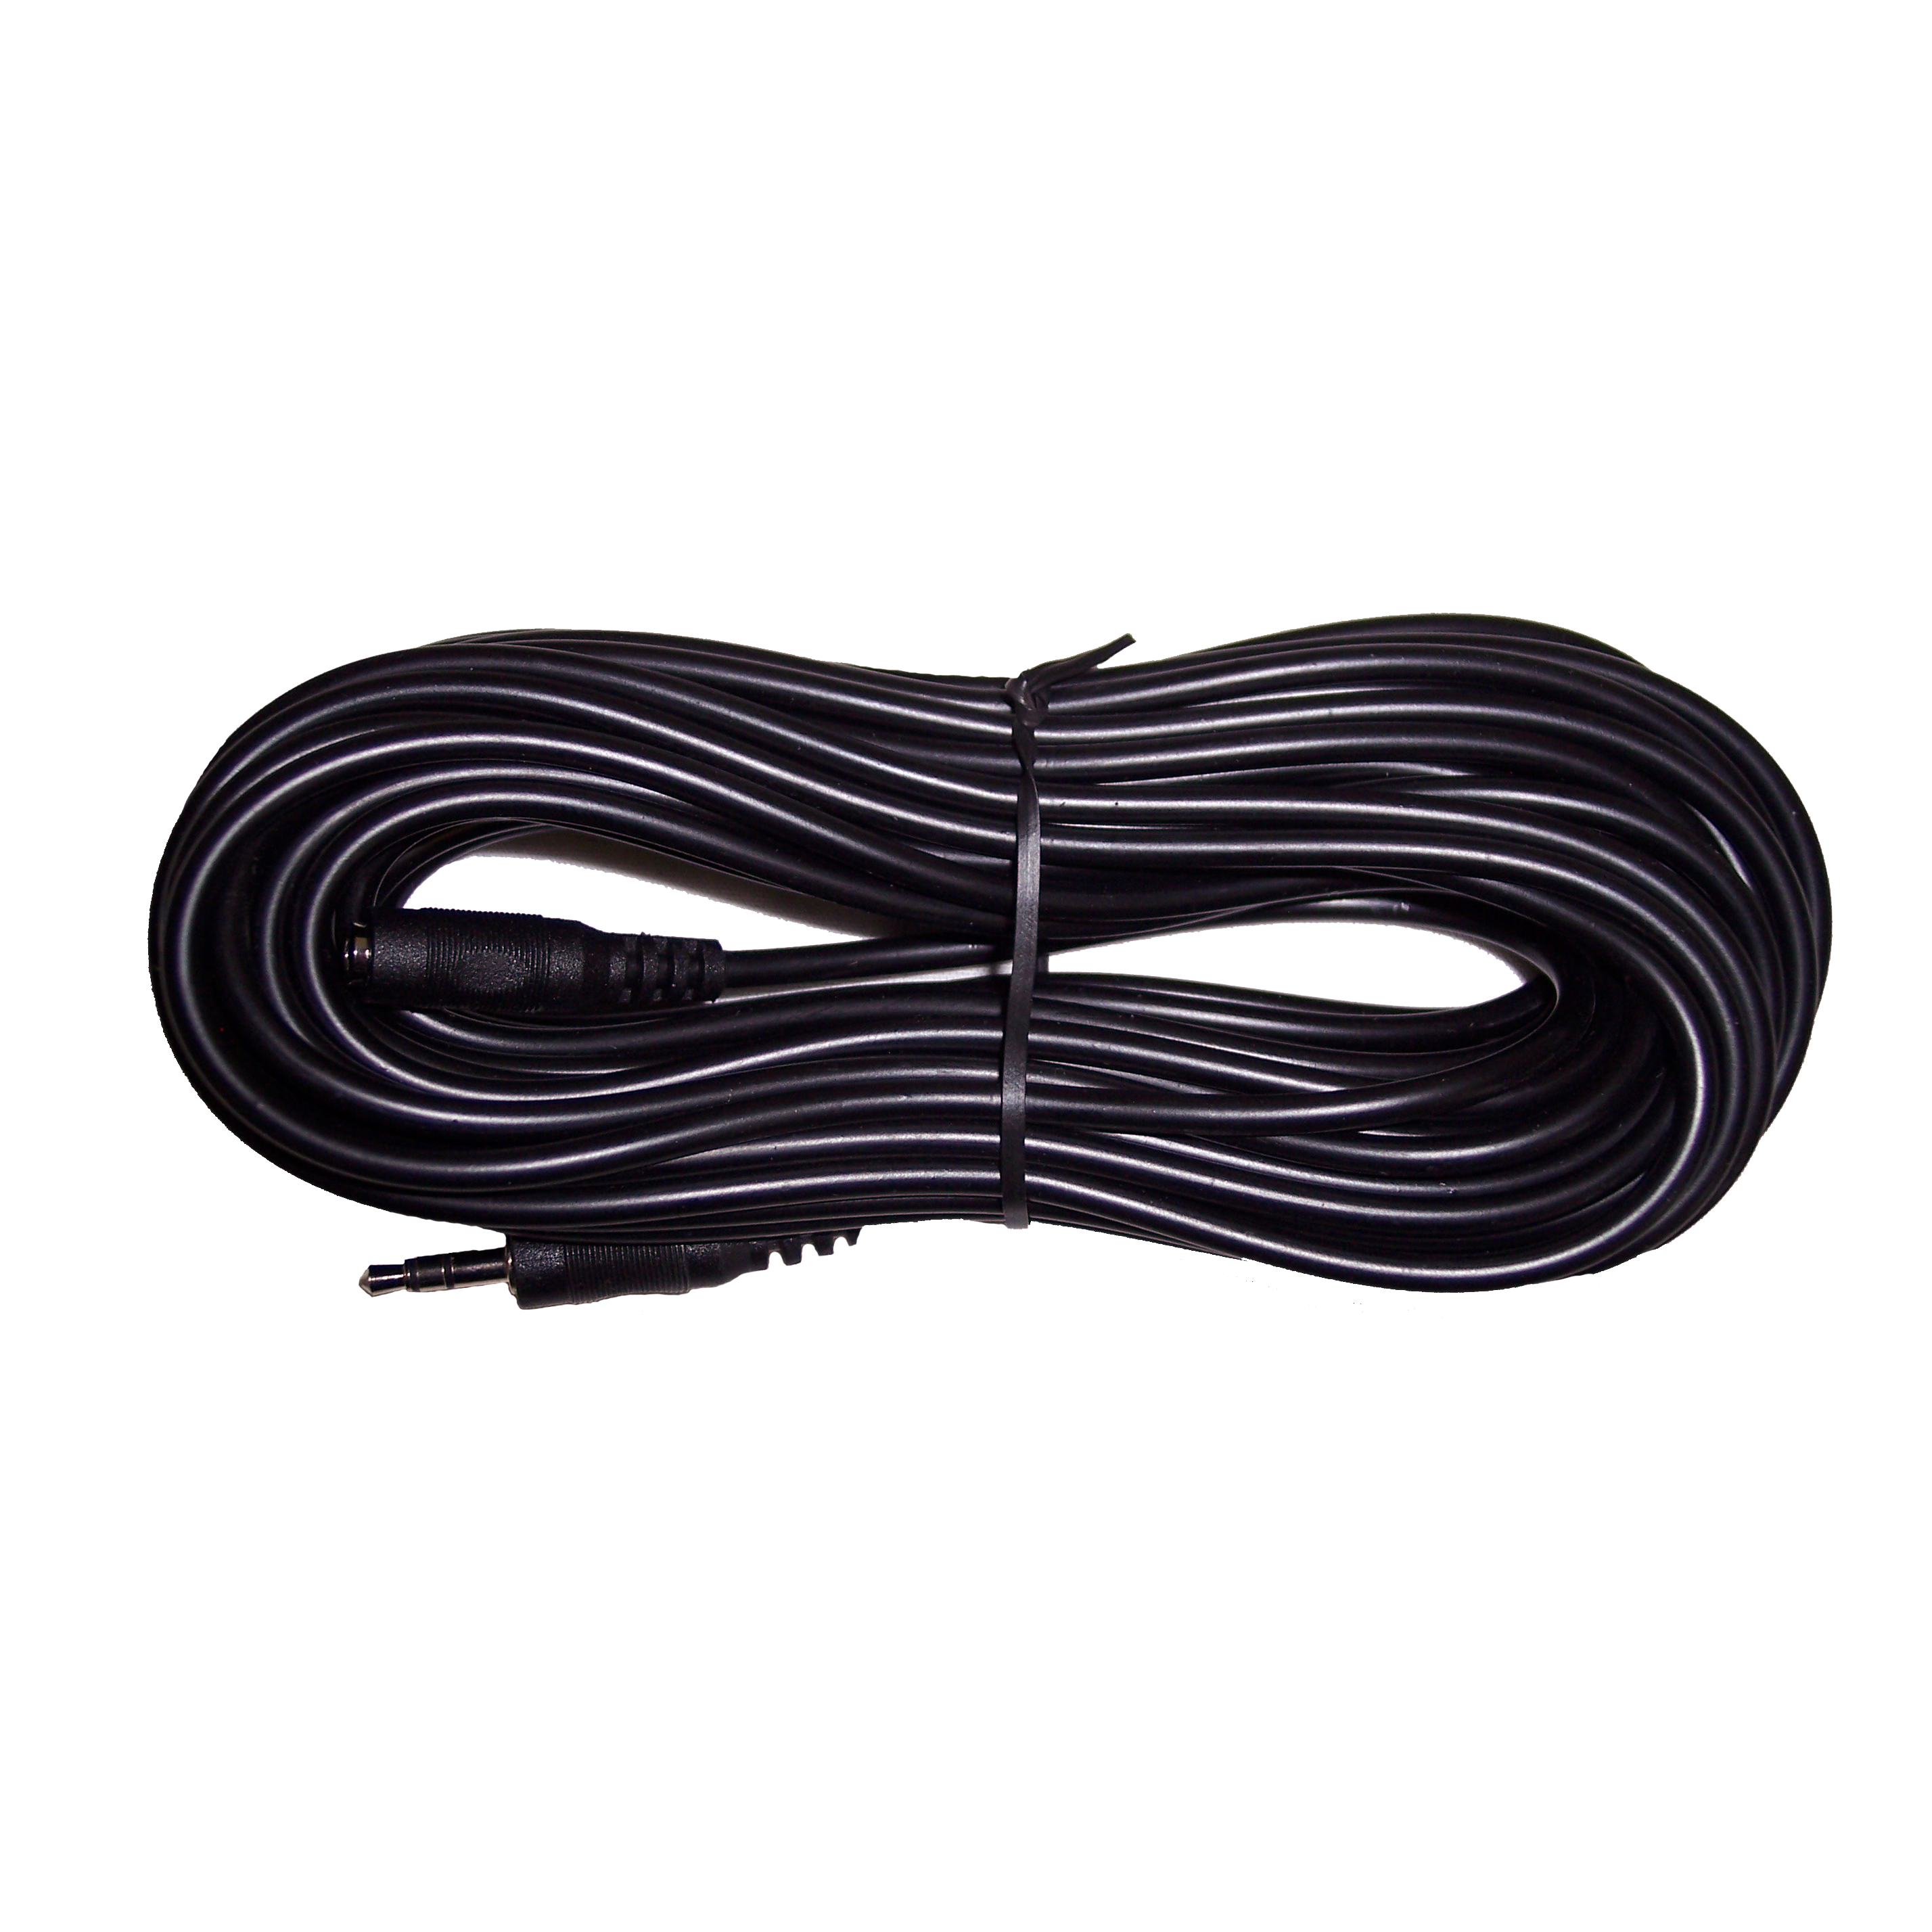 (DC-GPS-ANT-EXT-25) 25 foot GPS Antenna Extension Cable with 3.5mm Male to Female Connectors